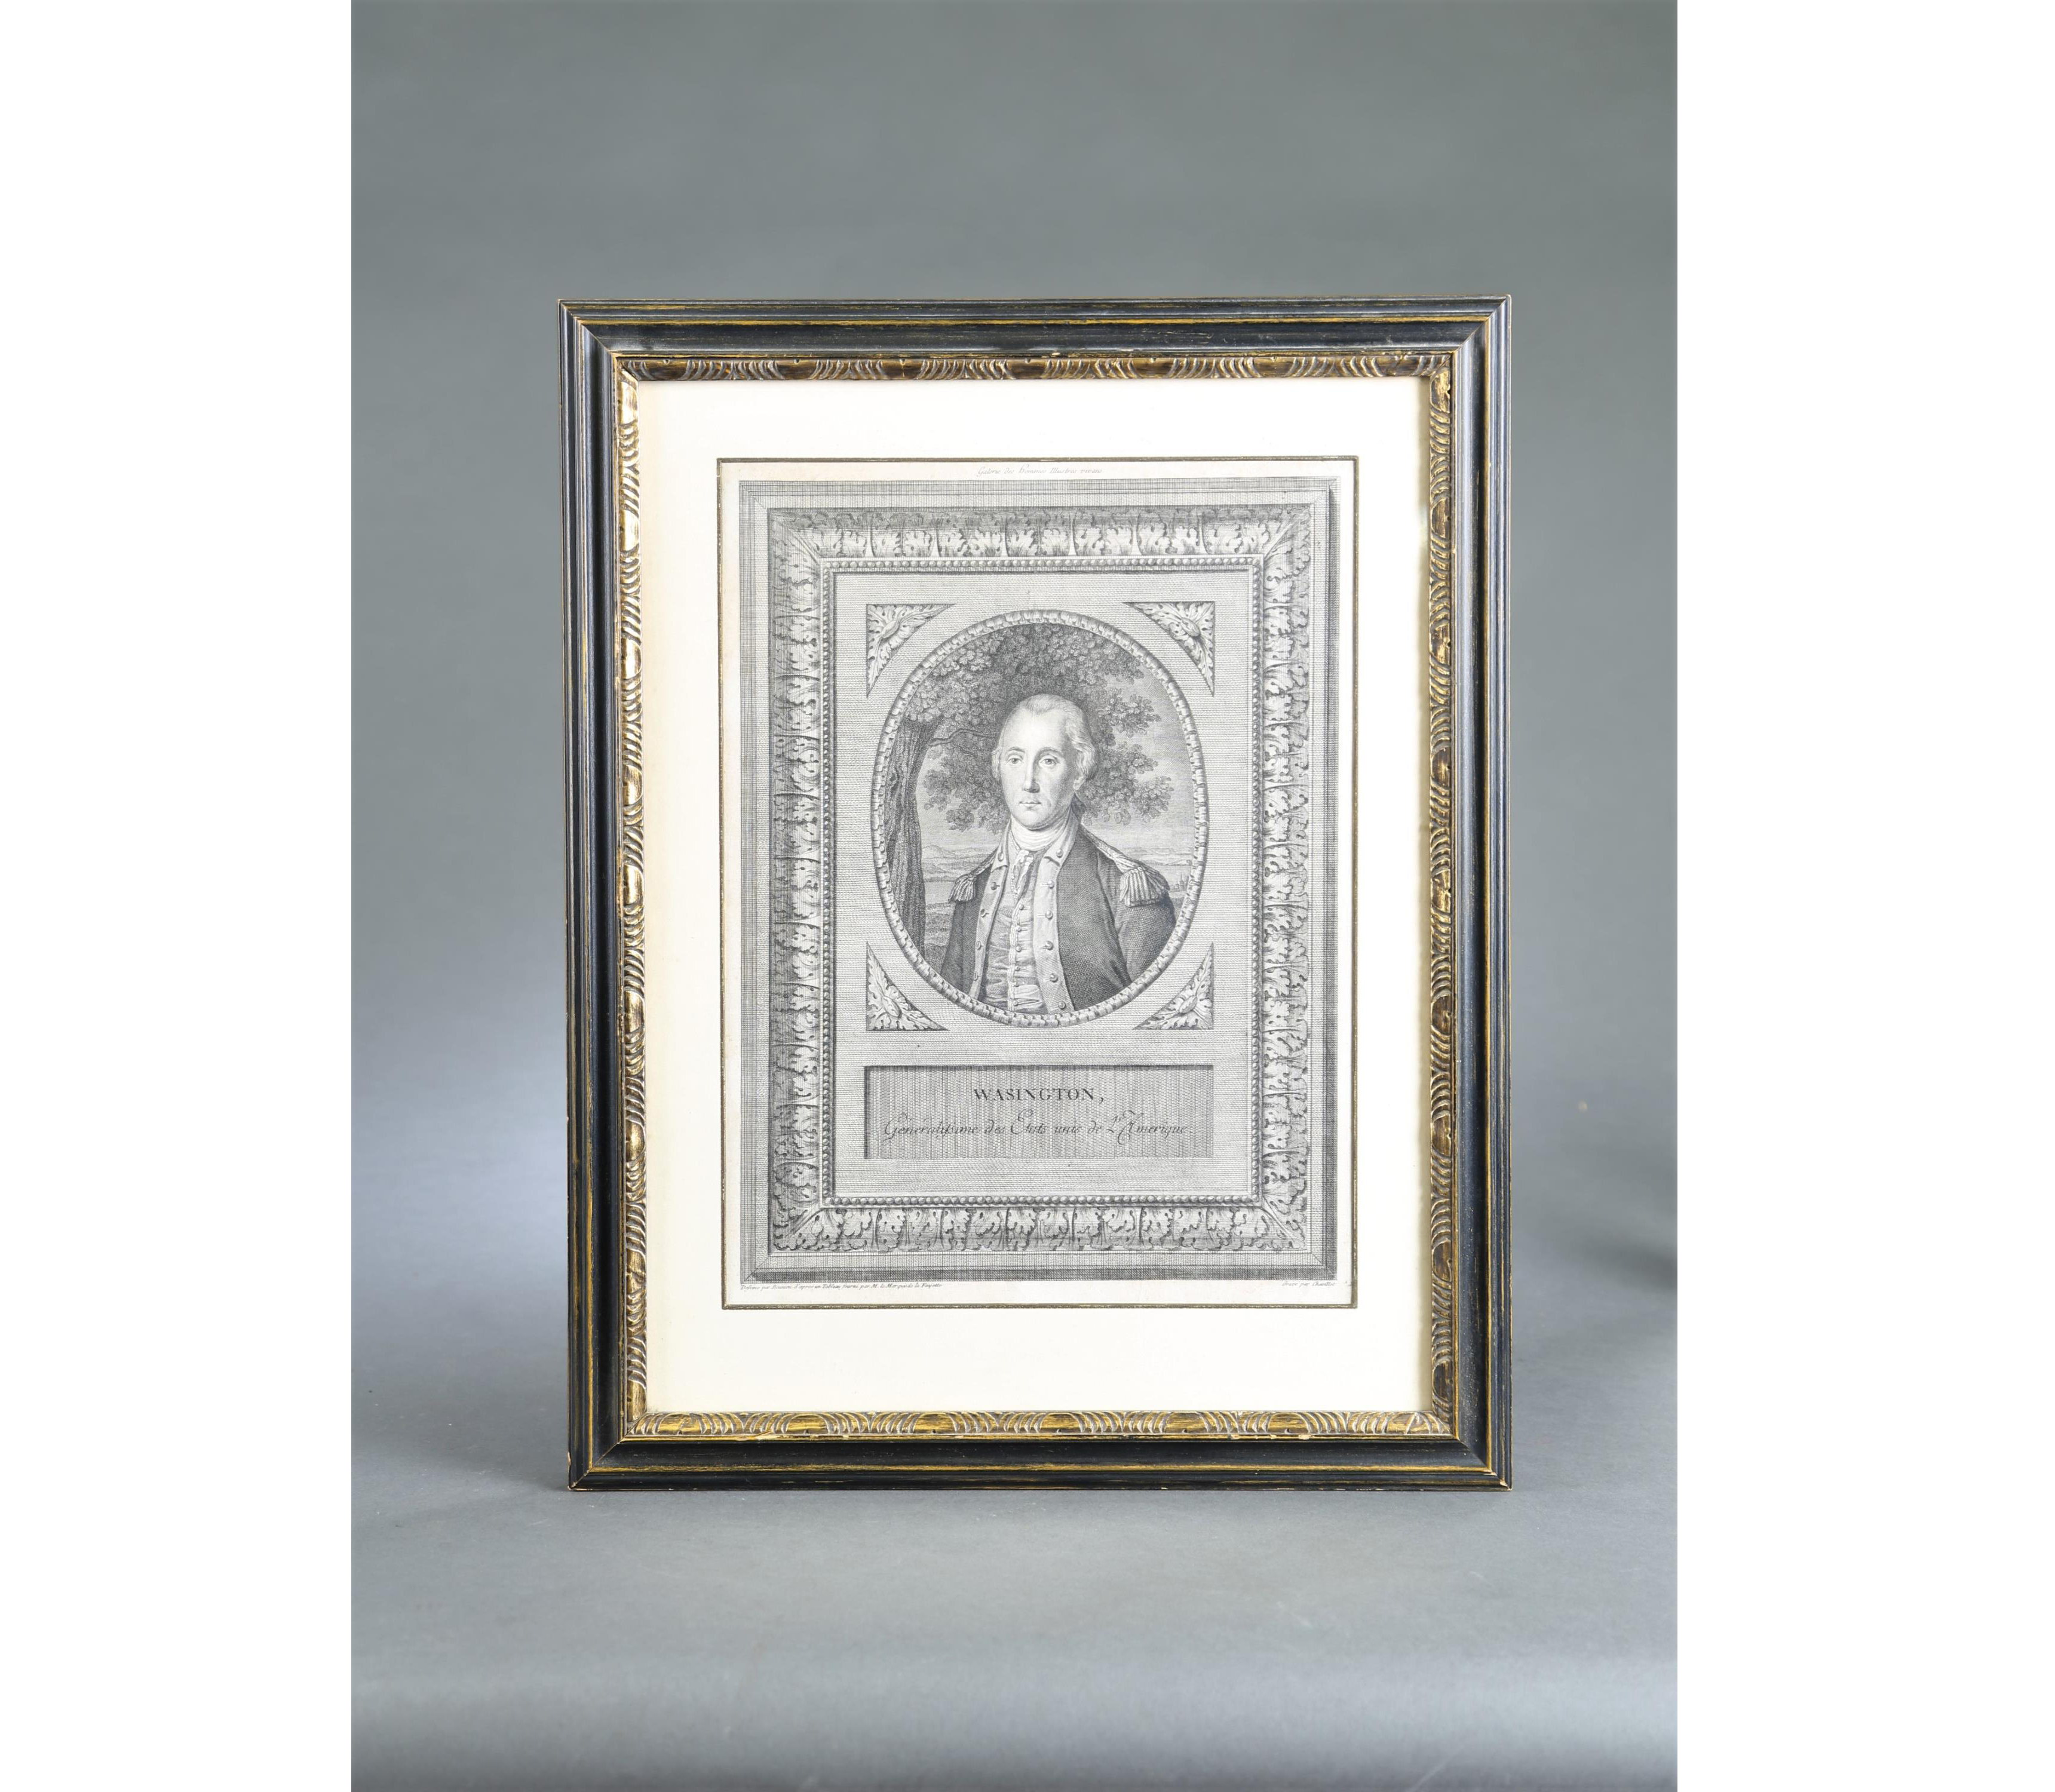 Extremely rare first state engraving of a full bust drawing of George Washington in uniform, executed by the French engraver Juste Chevillet and drawn in Paris circa 1785 by Michel-Honore Bounieu, estimated at $700-$1,000. Image courtesy of Quinn’s Auction Galleries